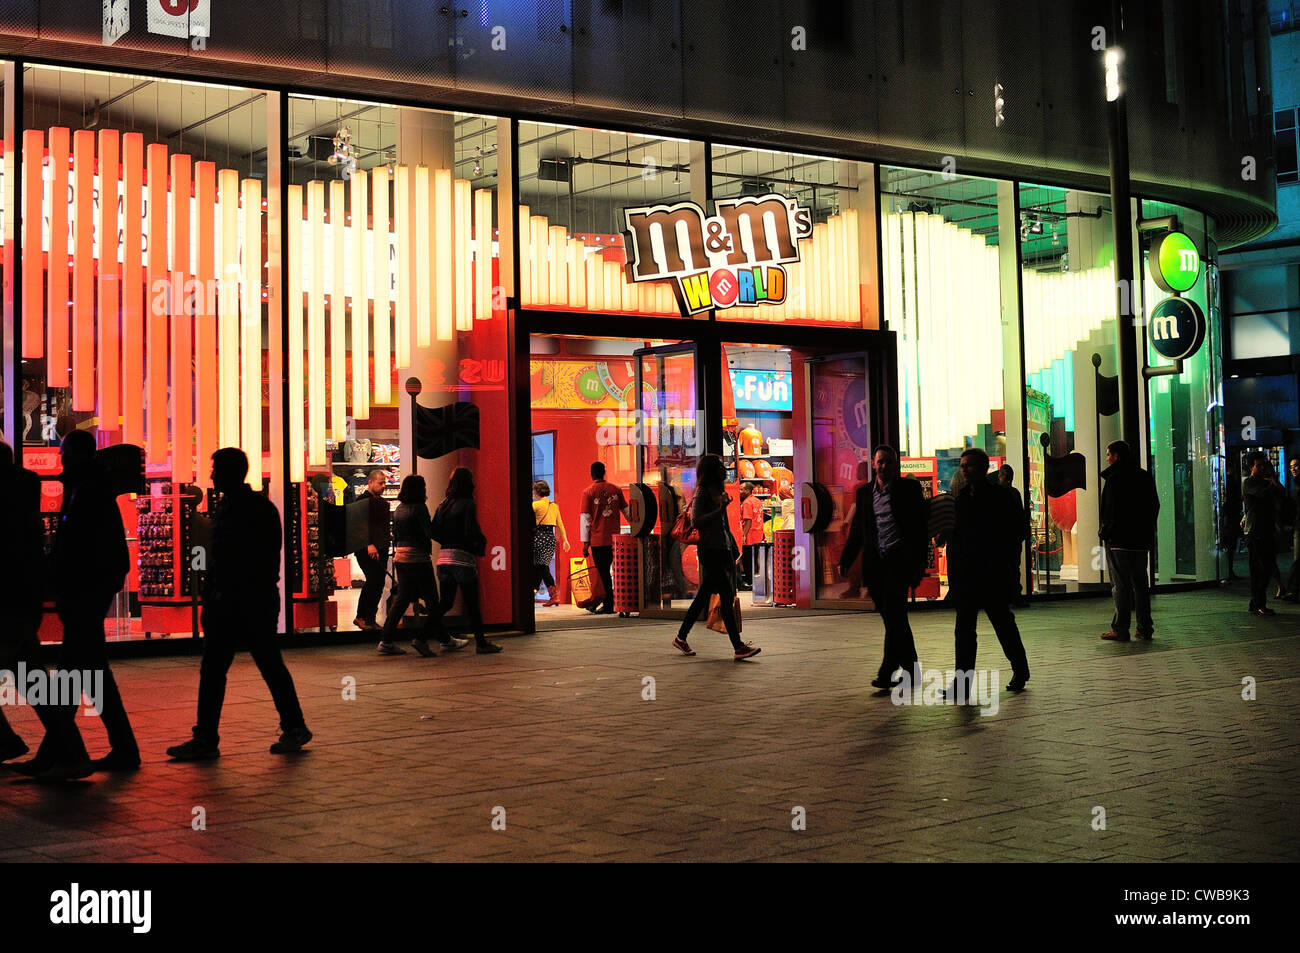 Facade of The M&M store Central London at night Stock Photo